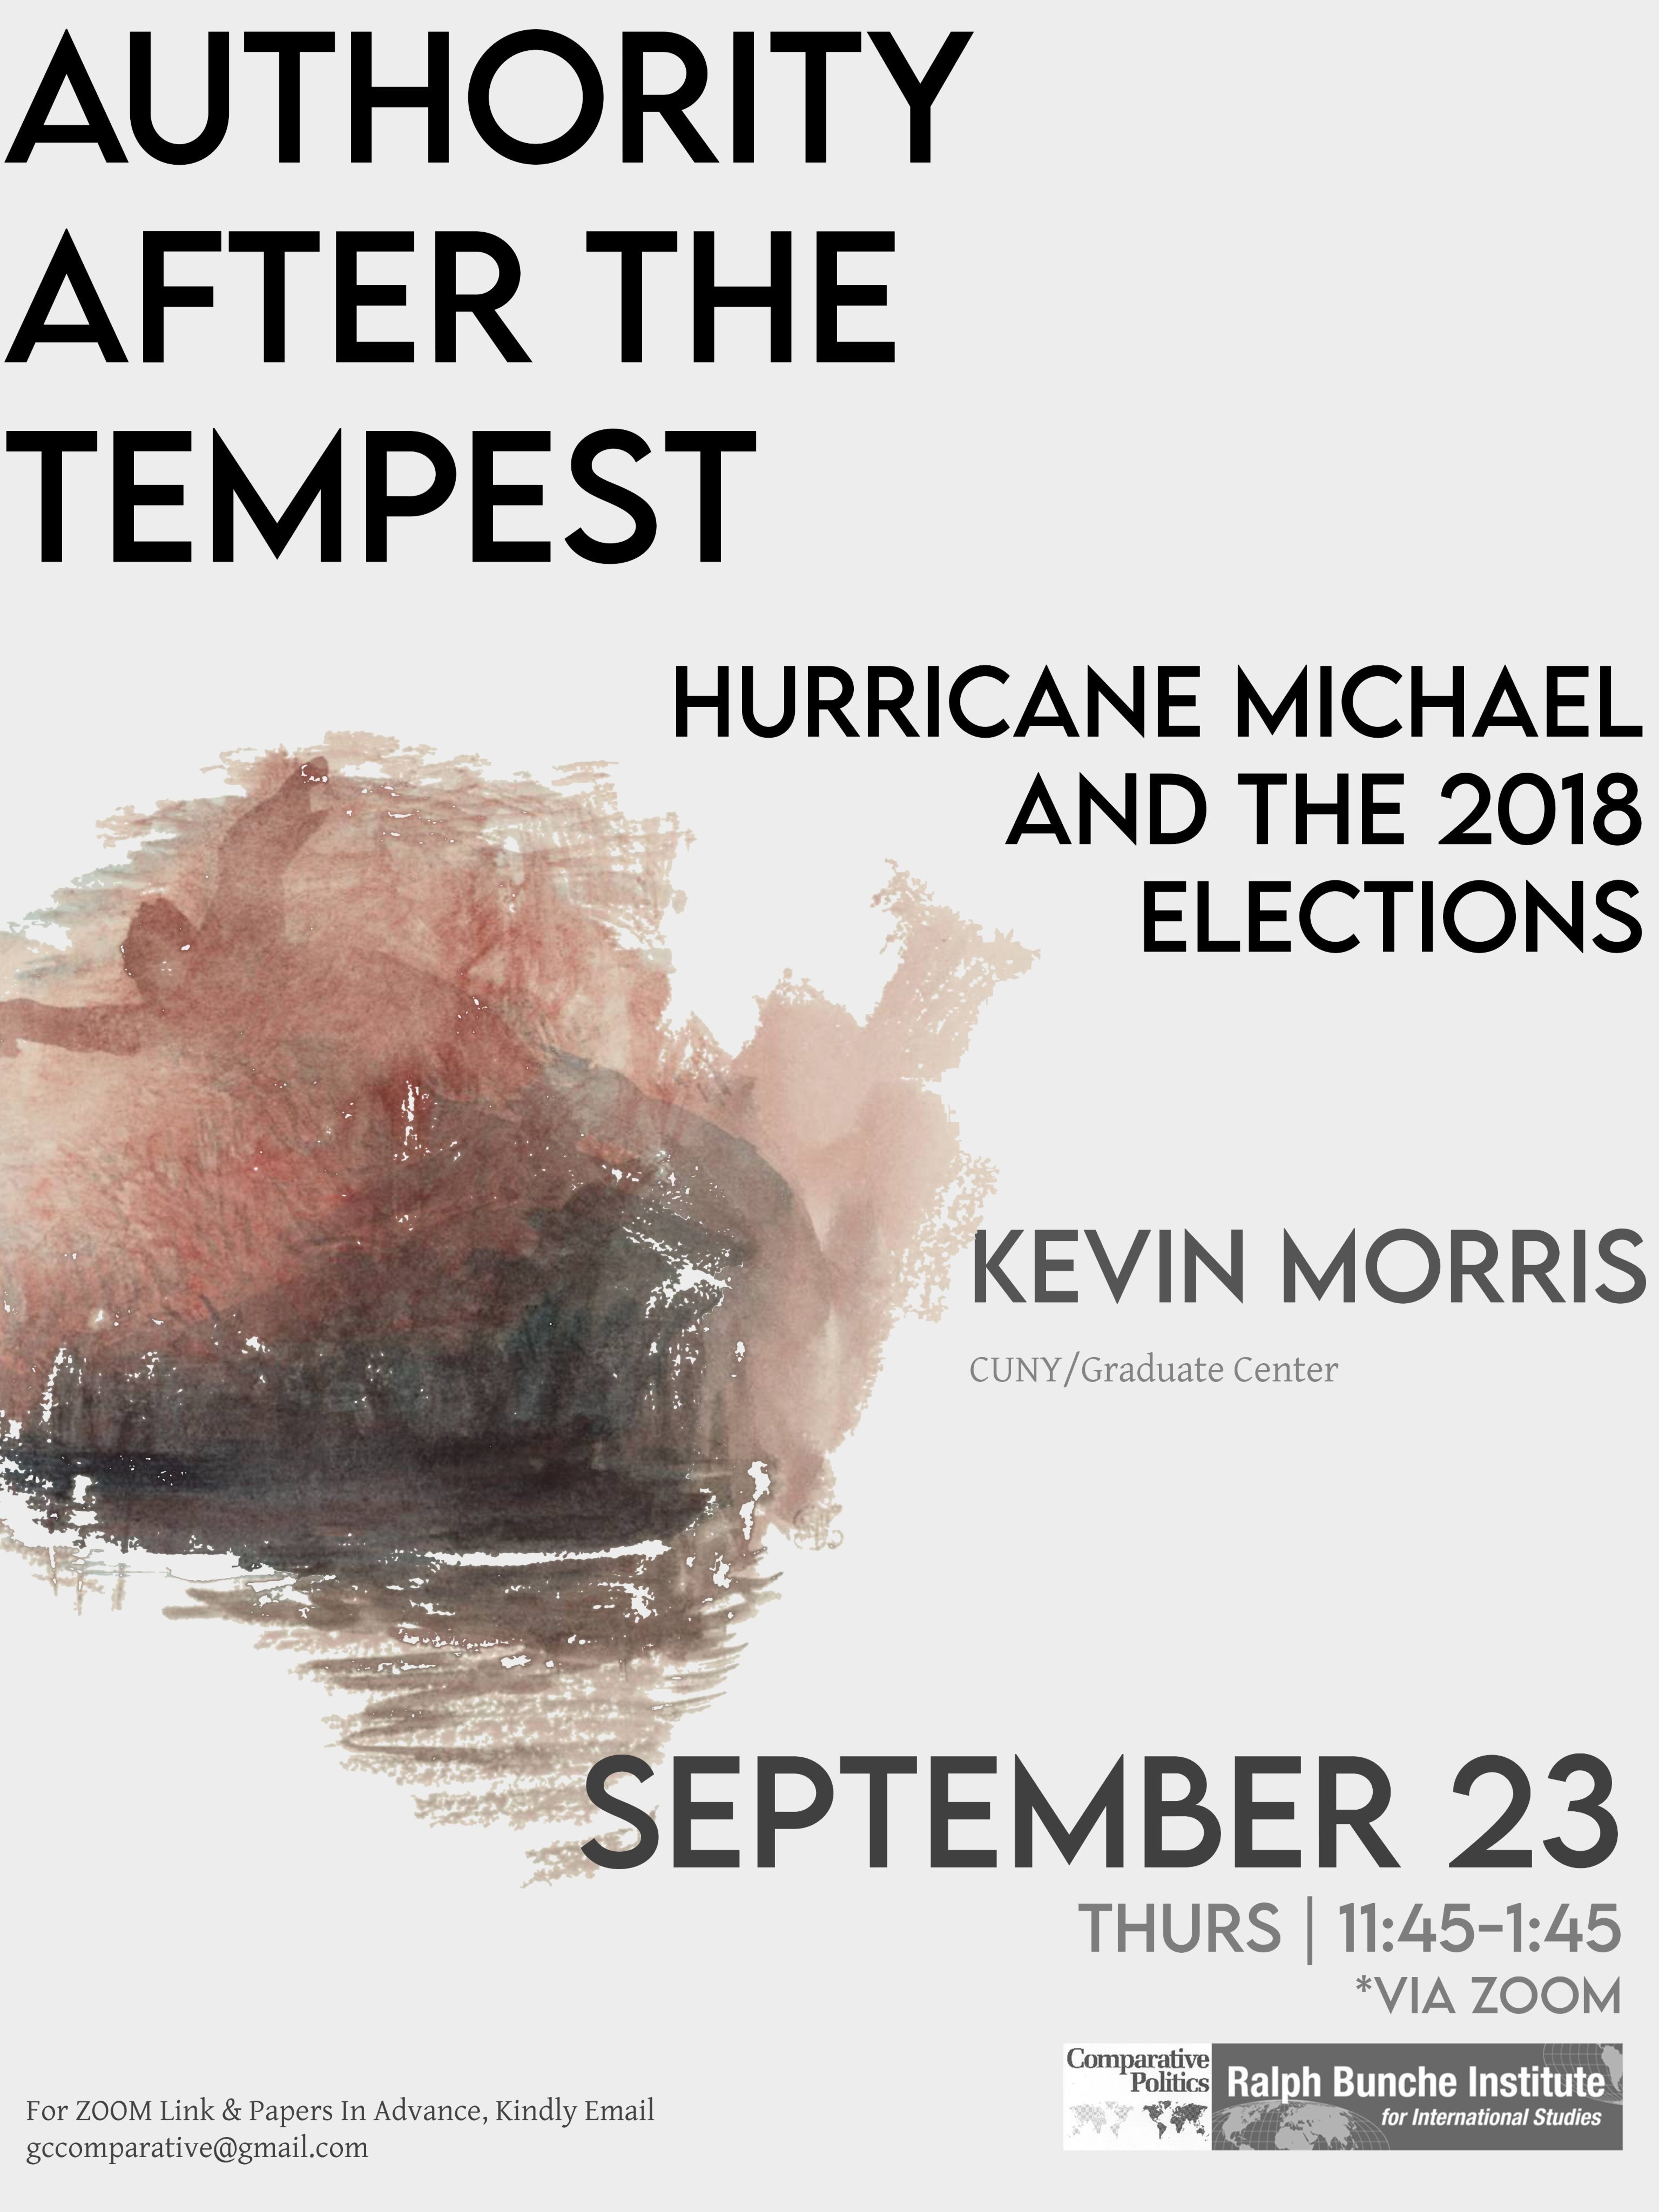 Comparative Politics Workshop: Kevin Morris, "Authority After the Tempest: Hurricane Michael and the 2018 Elections," Thursday, September 23, 11:45am-1:45pm EST